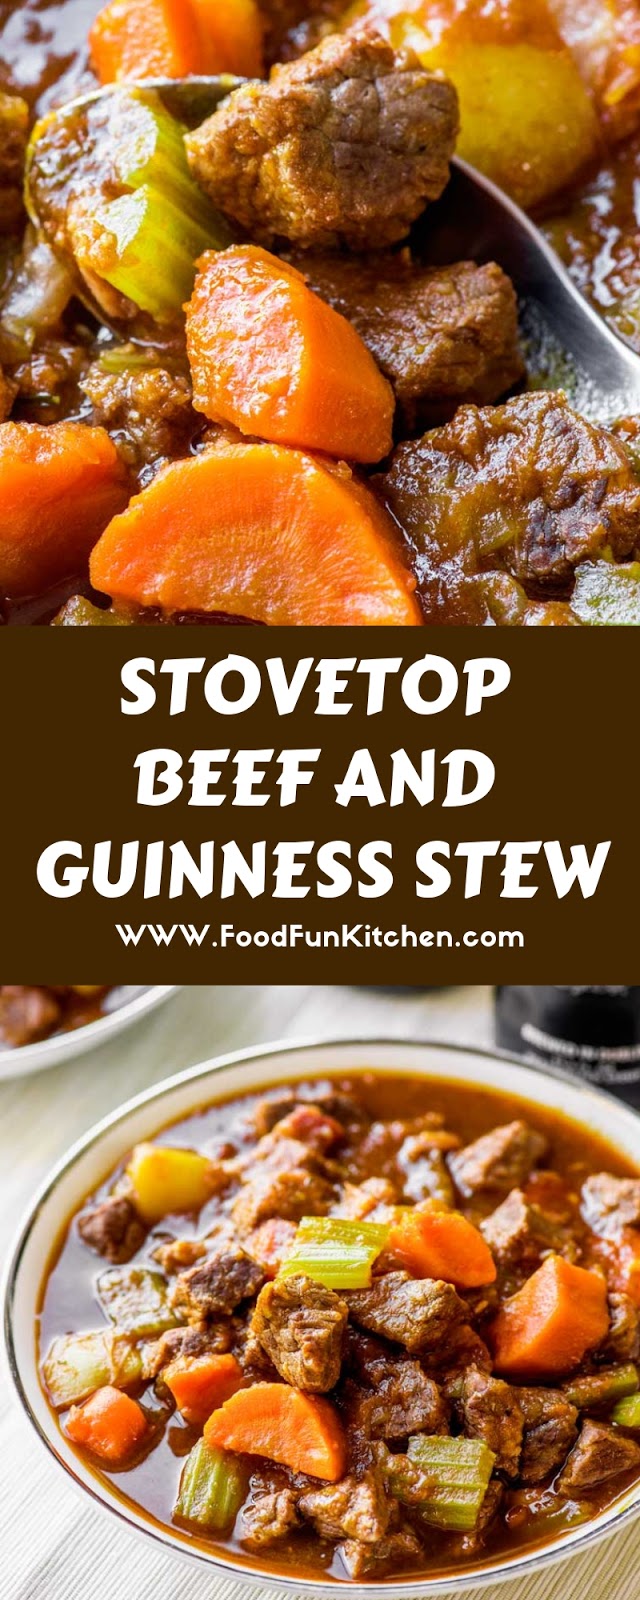 STOVETOP BEEF AND GUINNESS STEW